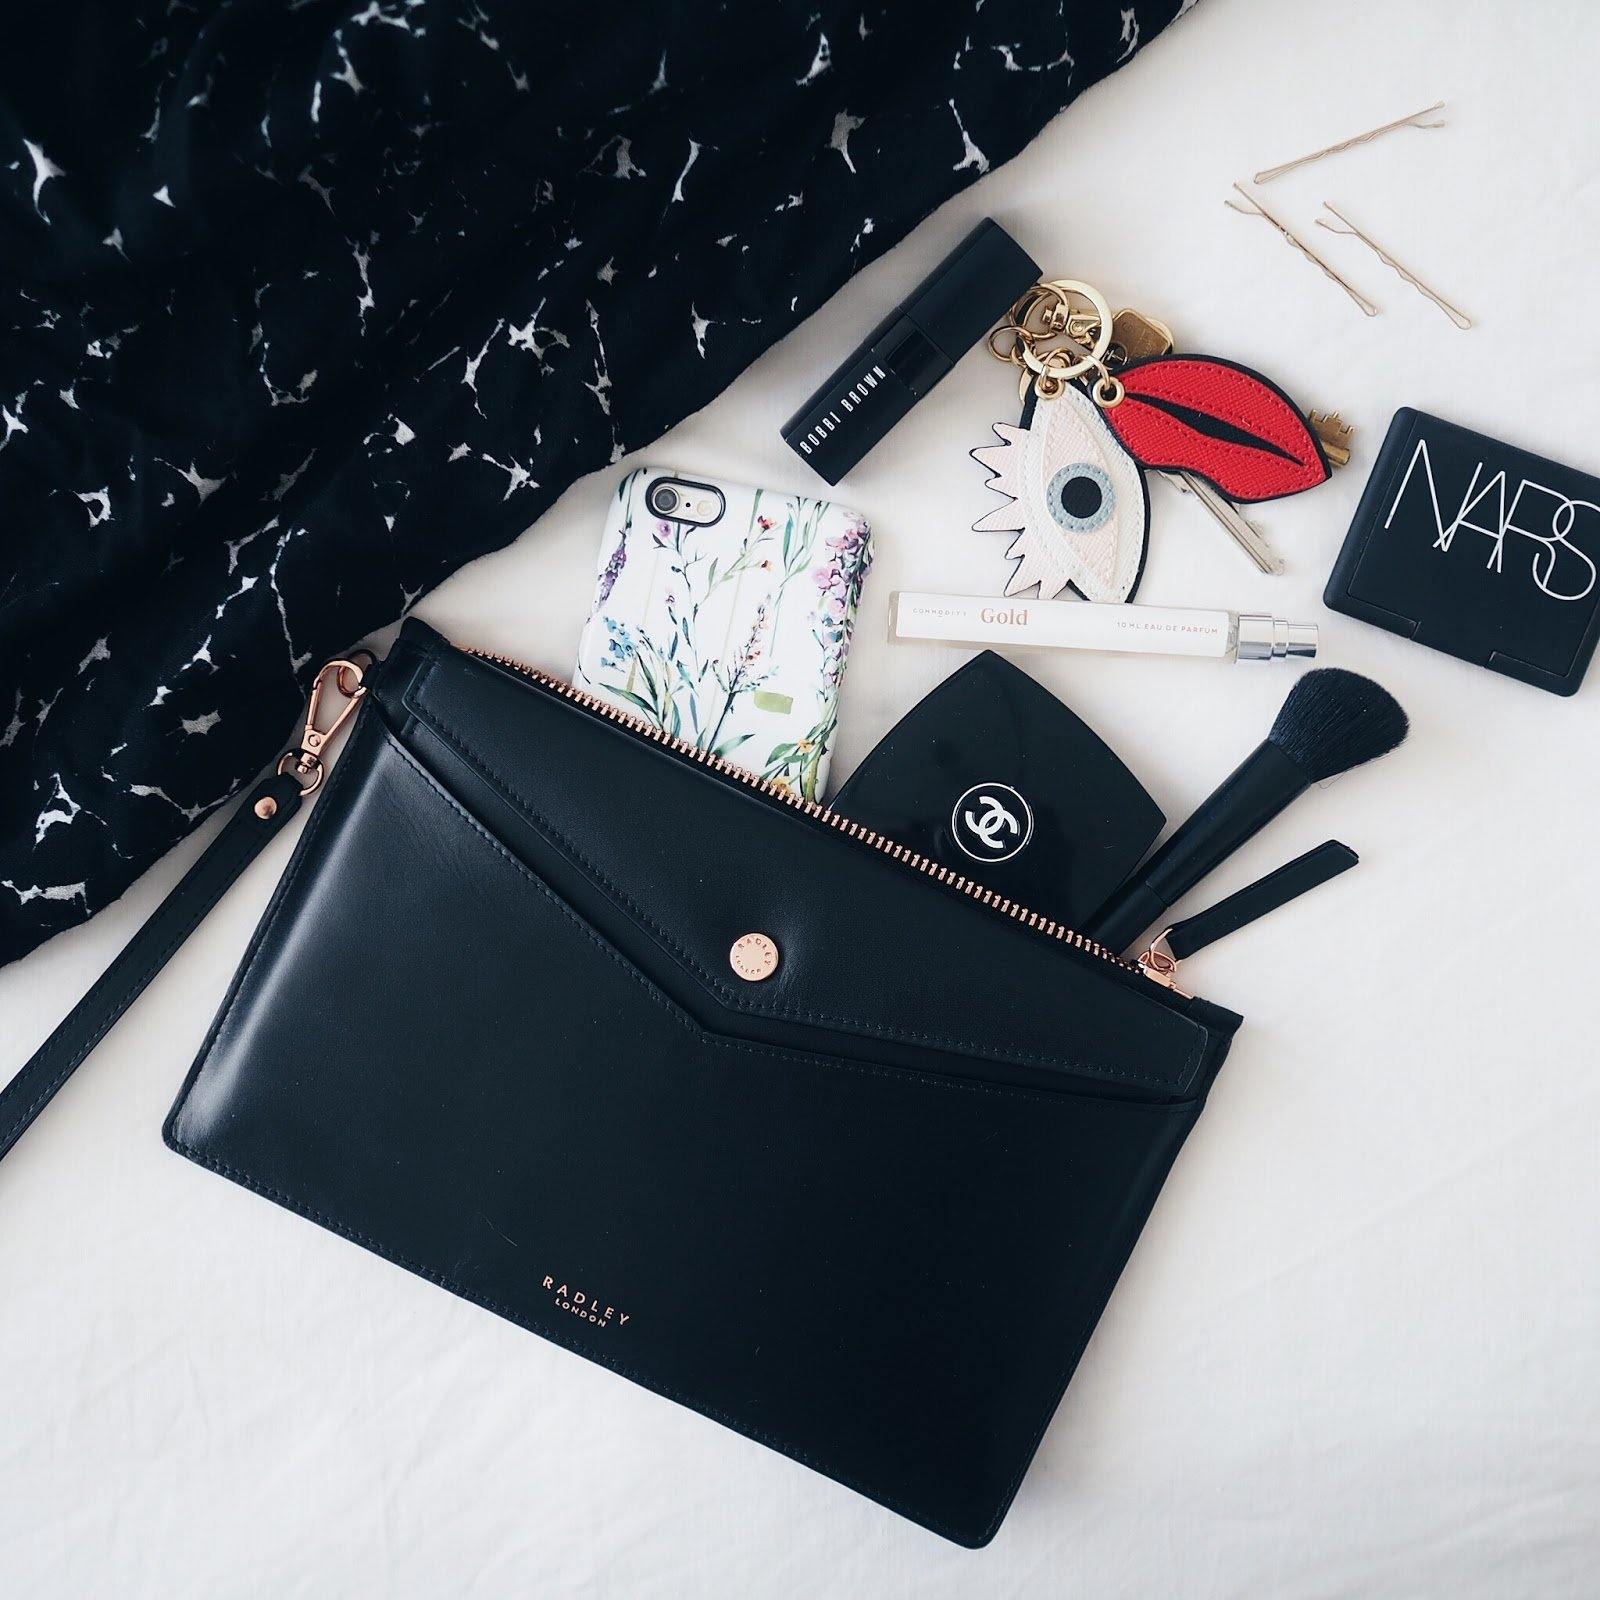 Prom Essentials | 10 Items to pack in your purse - Alyce Paris